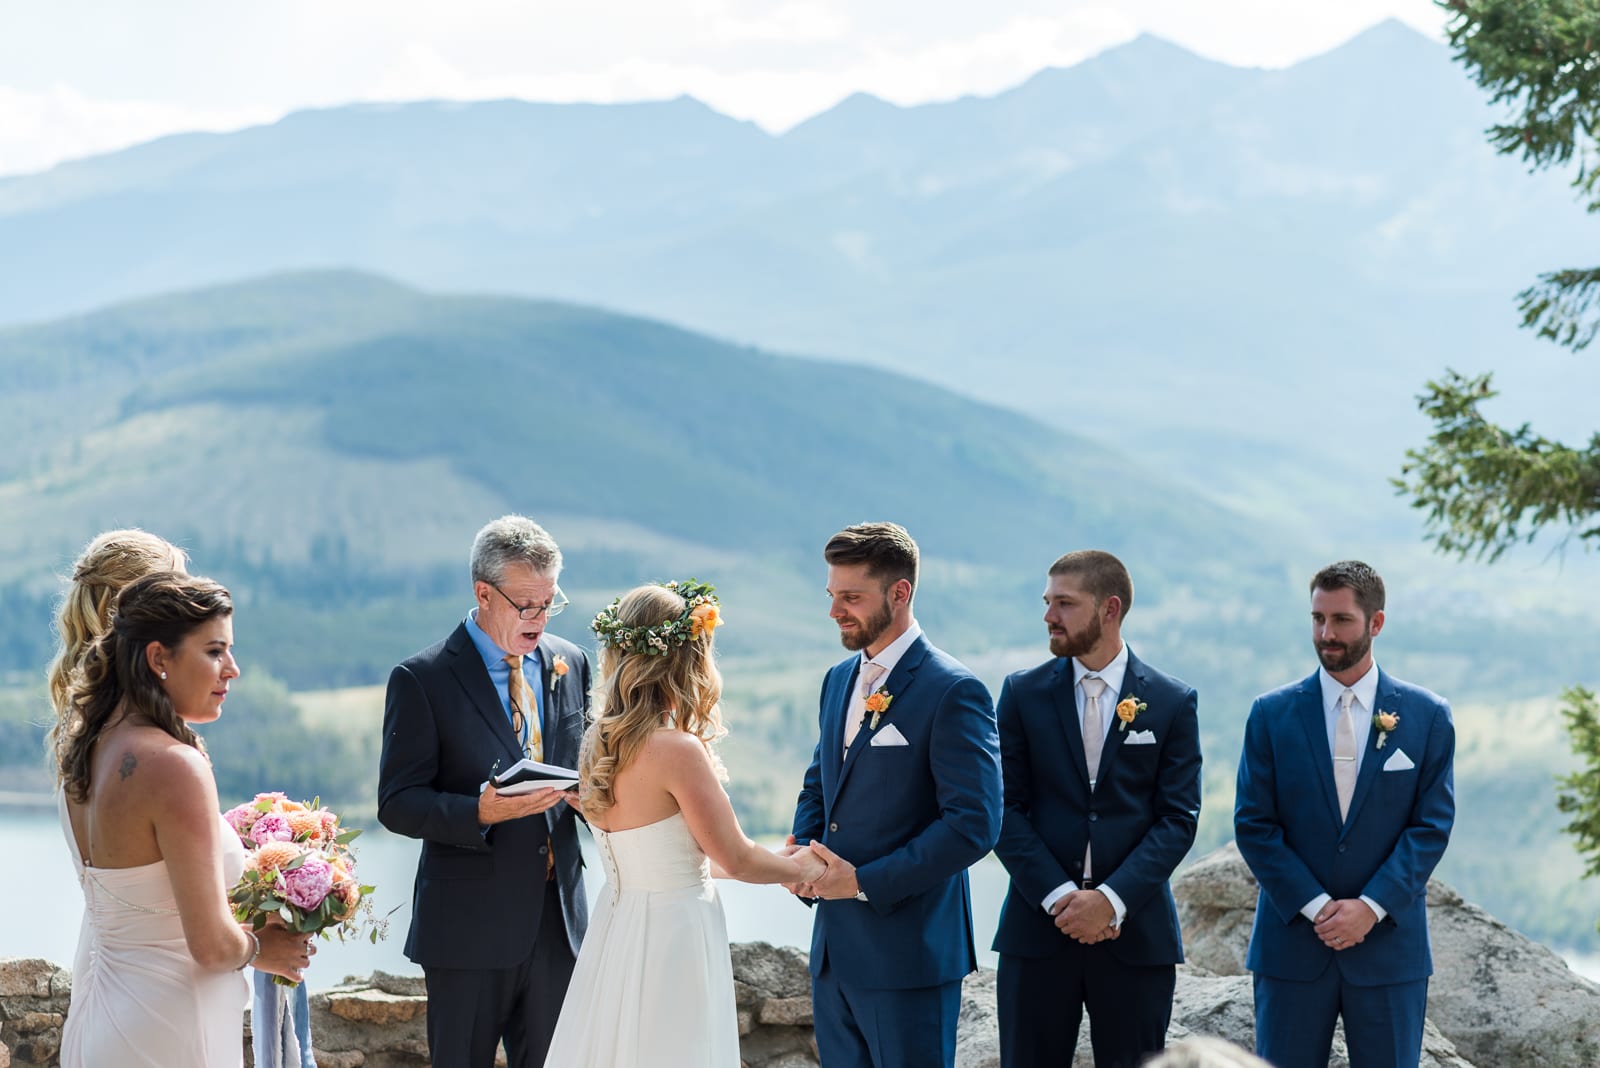 Second Wedding | Wedding Photography | Sapphire Point Overlook | From the Hip Photo